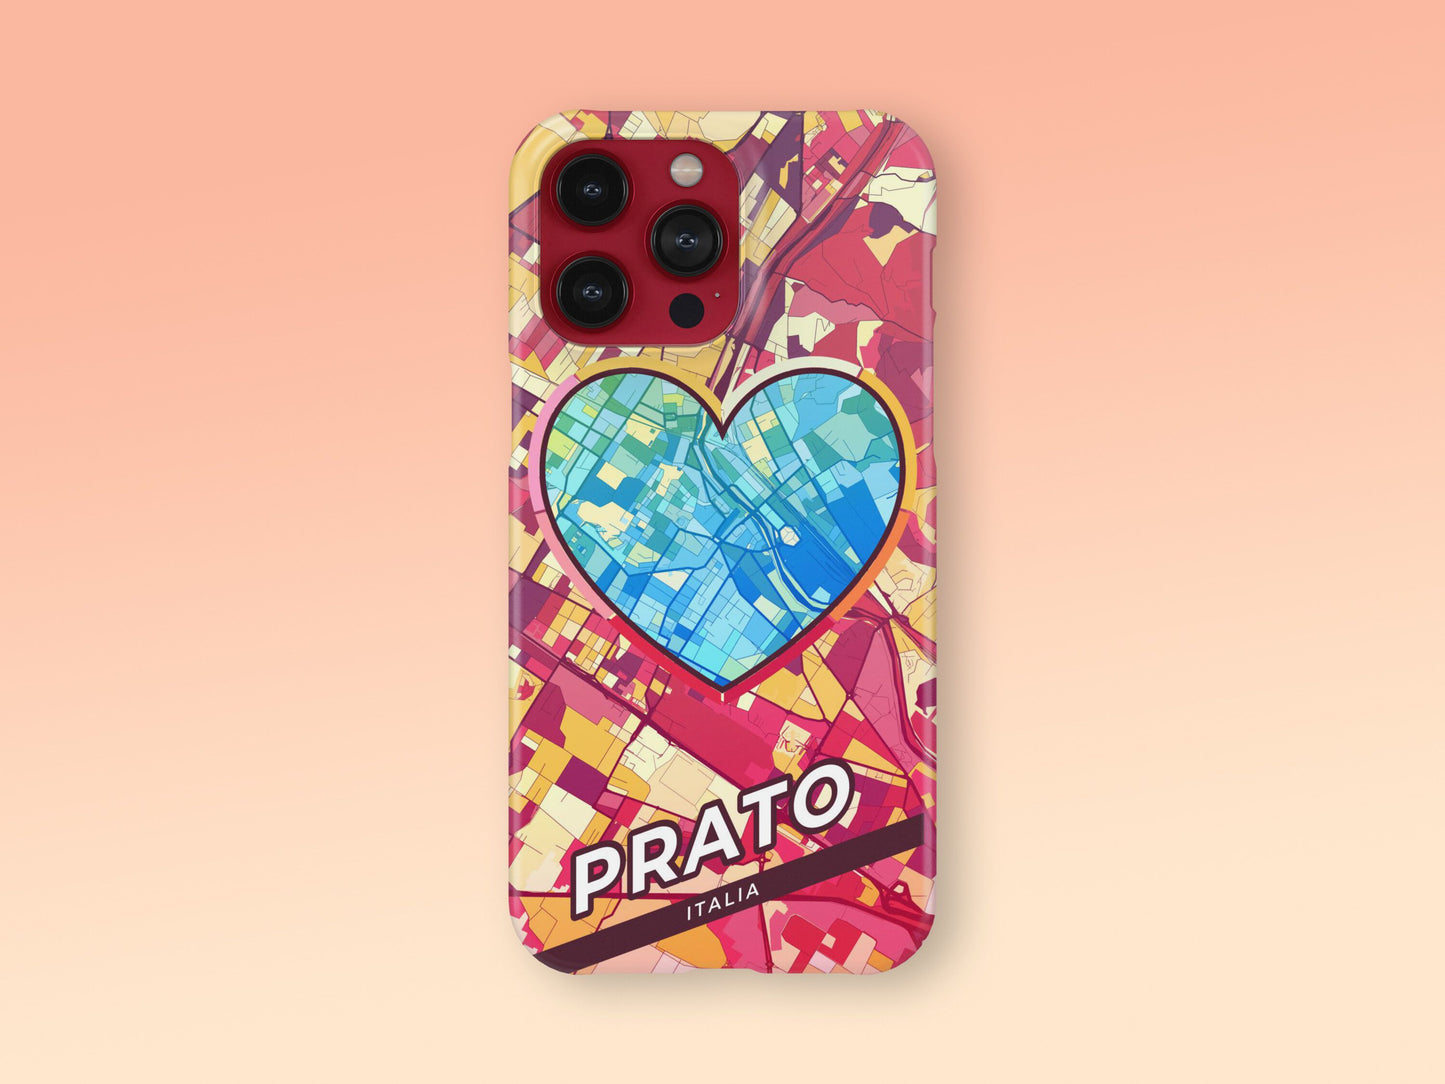 Prato Italy slim phone case with colorful icon. Birthday, wedding or housewarming gift. Couple match cases. 2